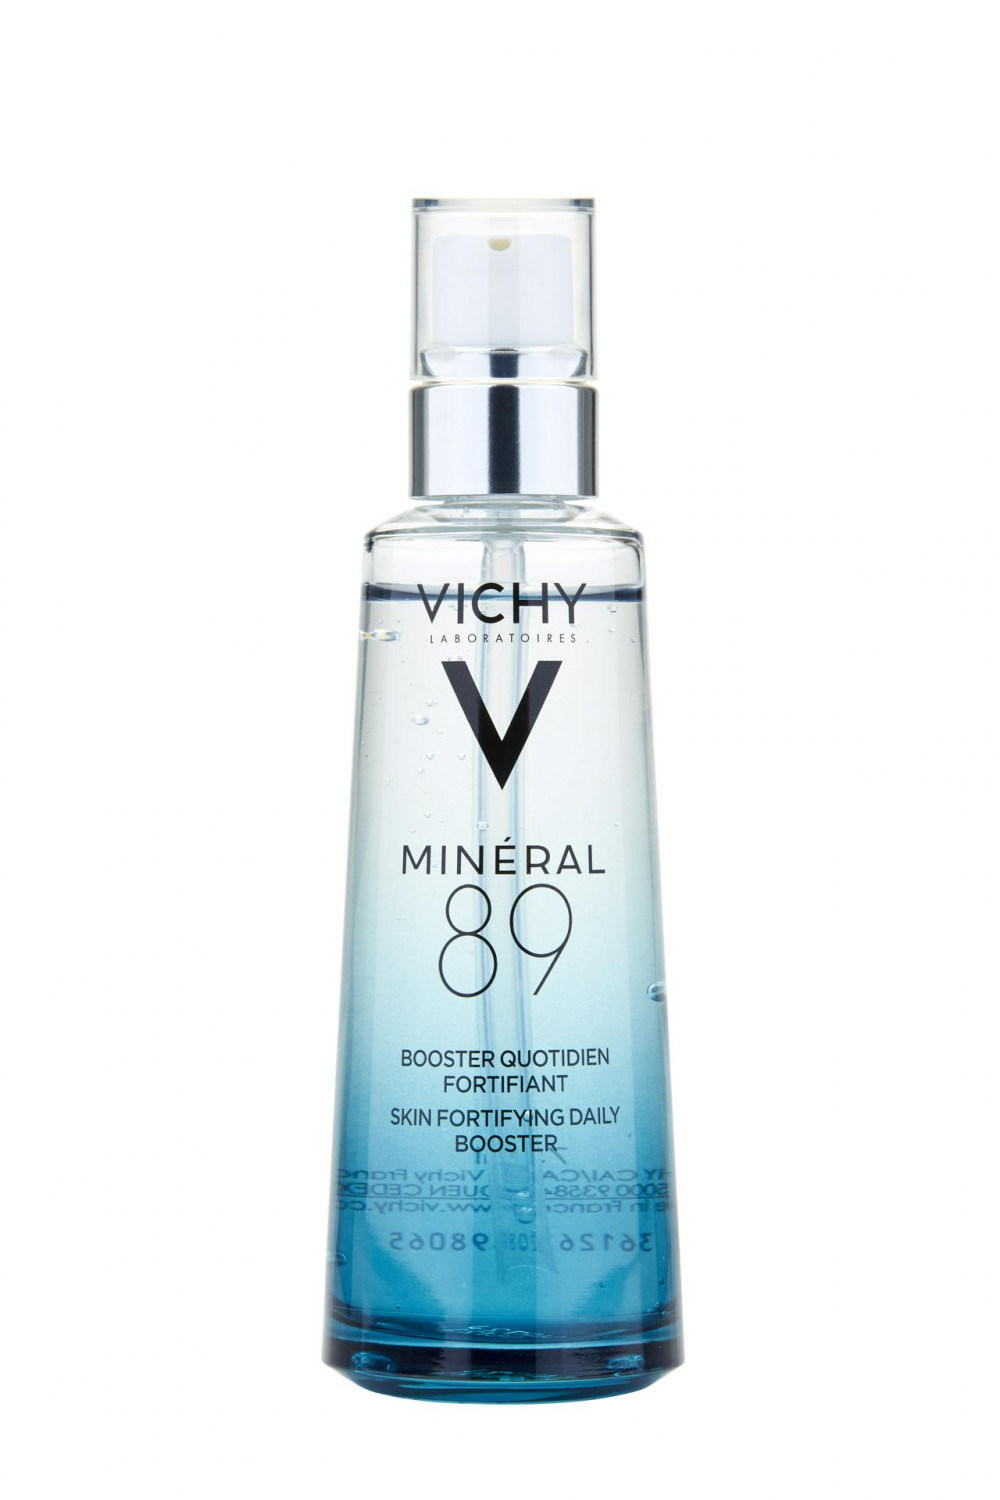 VC MINERAL 89 SKIN FORTIFYING BOOSTER 50ML.